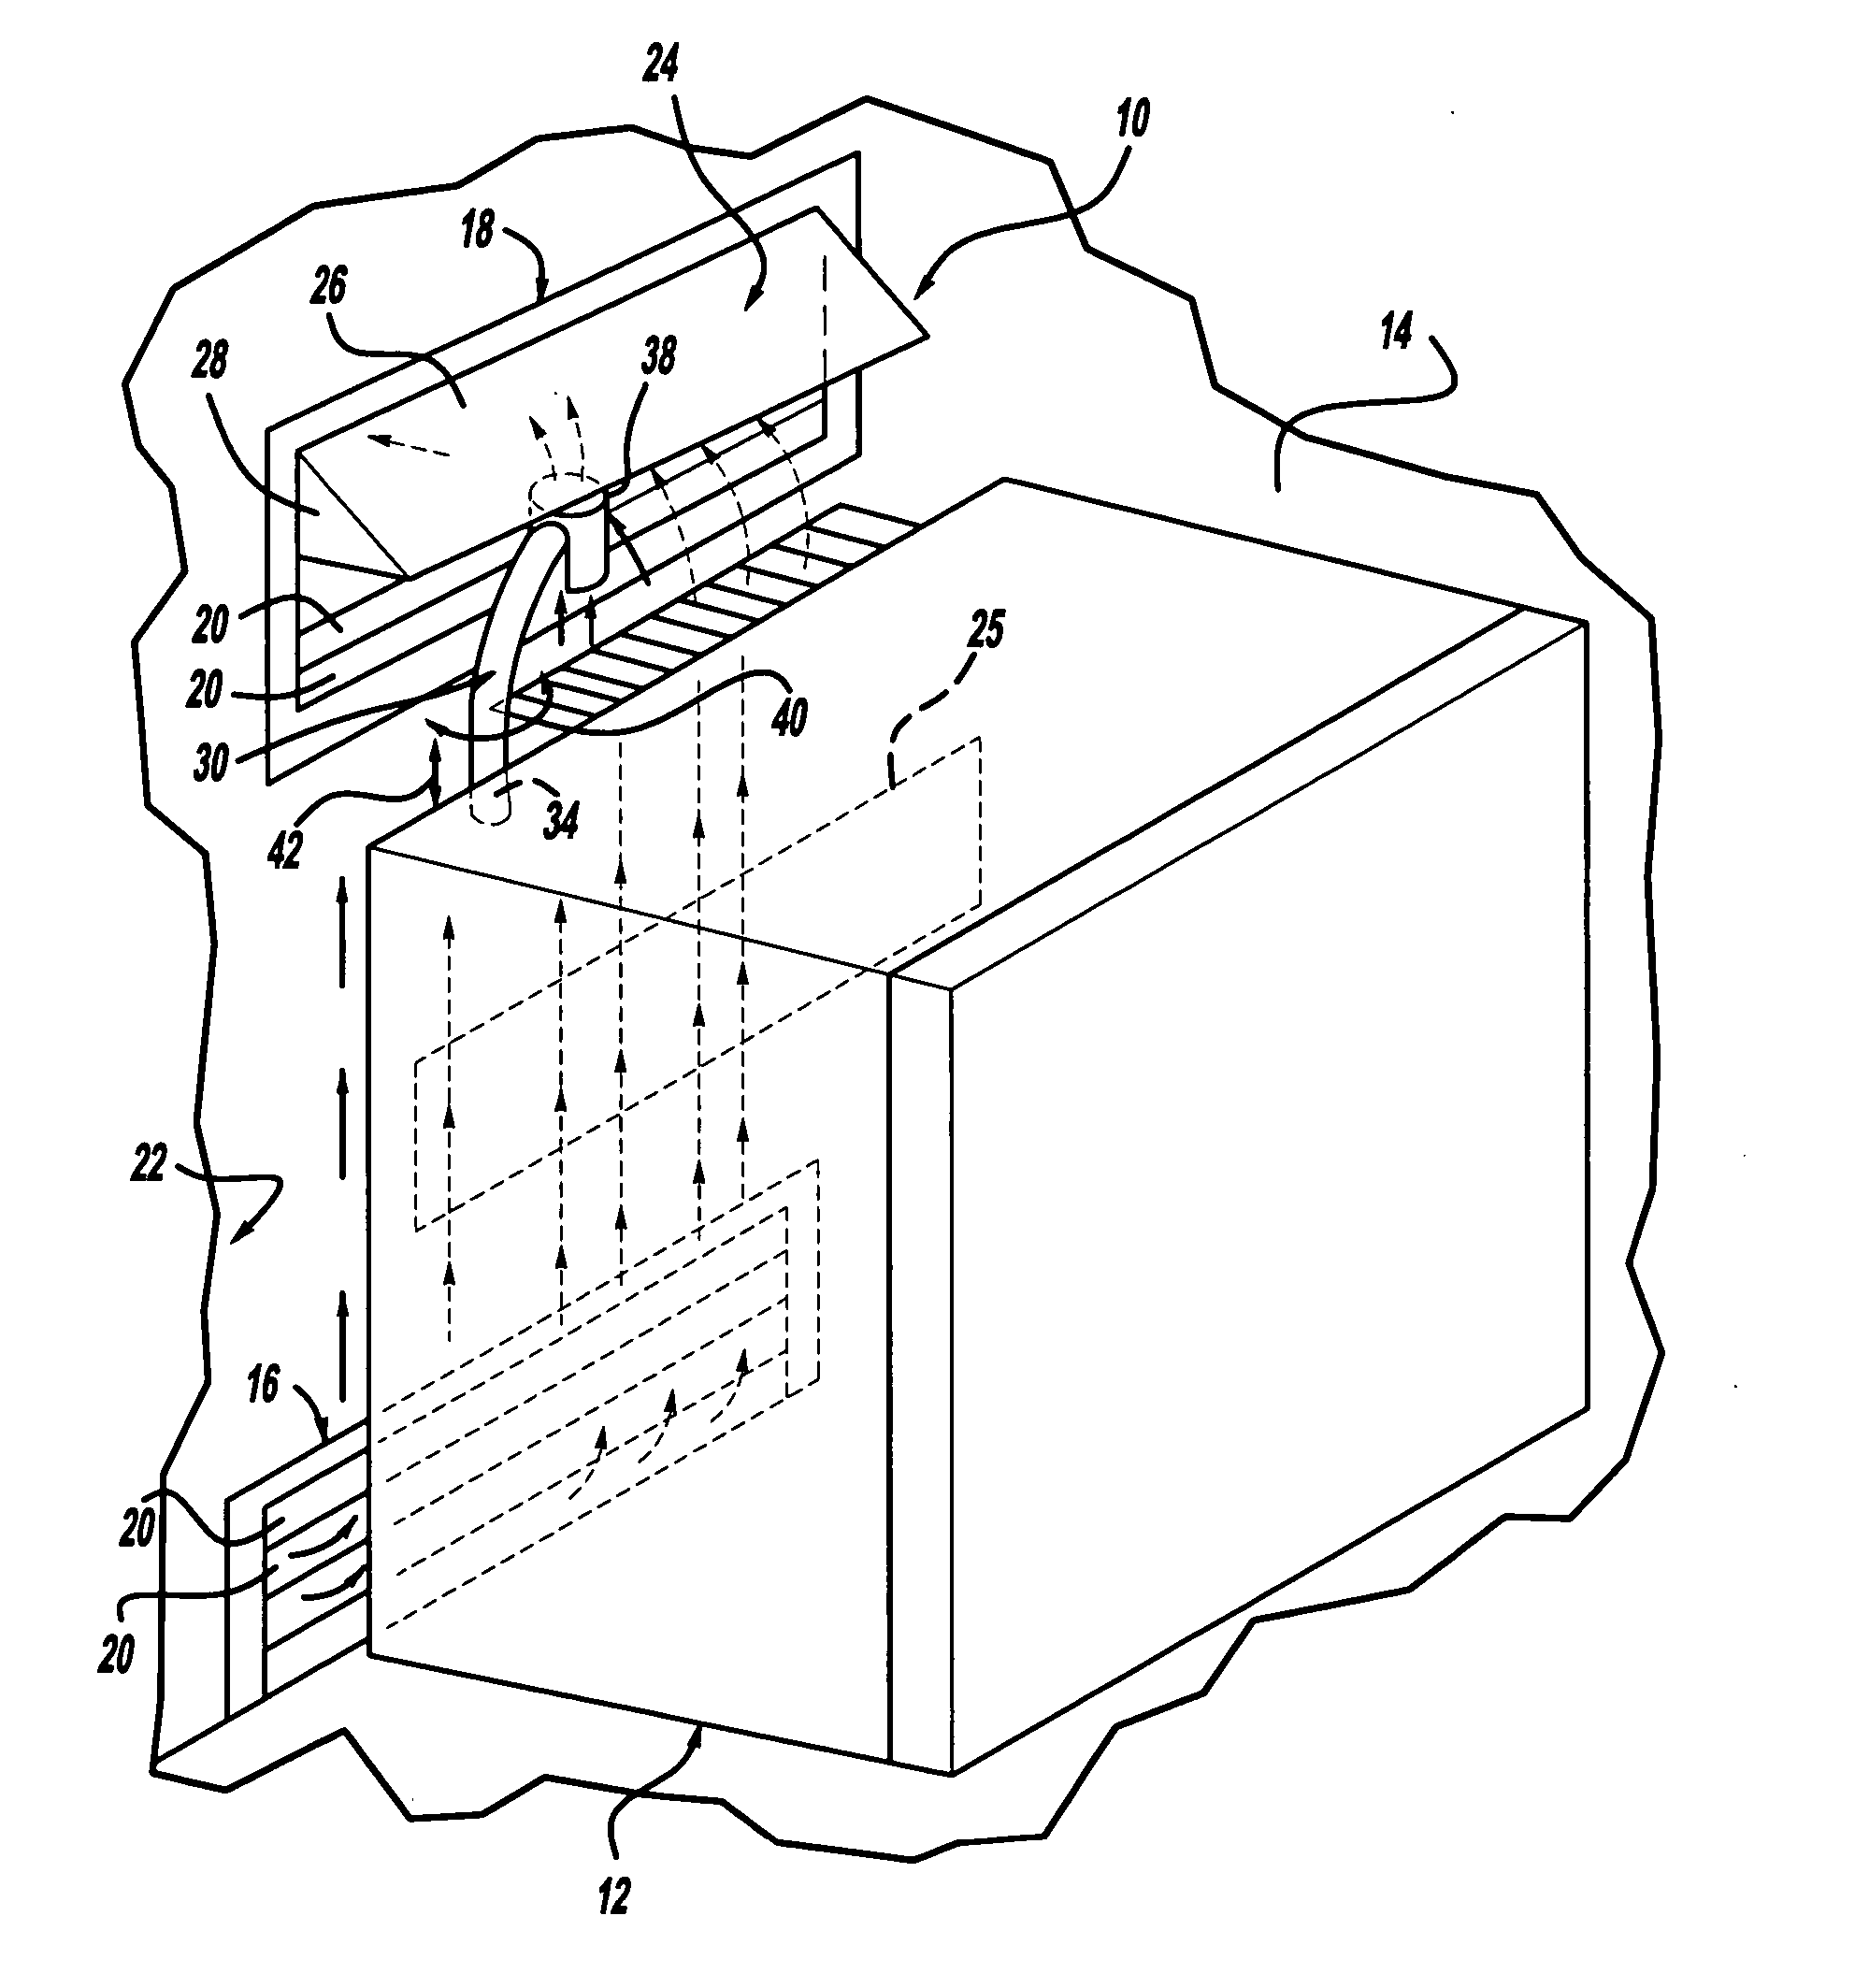 Venting arrangement for a vehicle refrigerator and related method